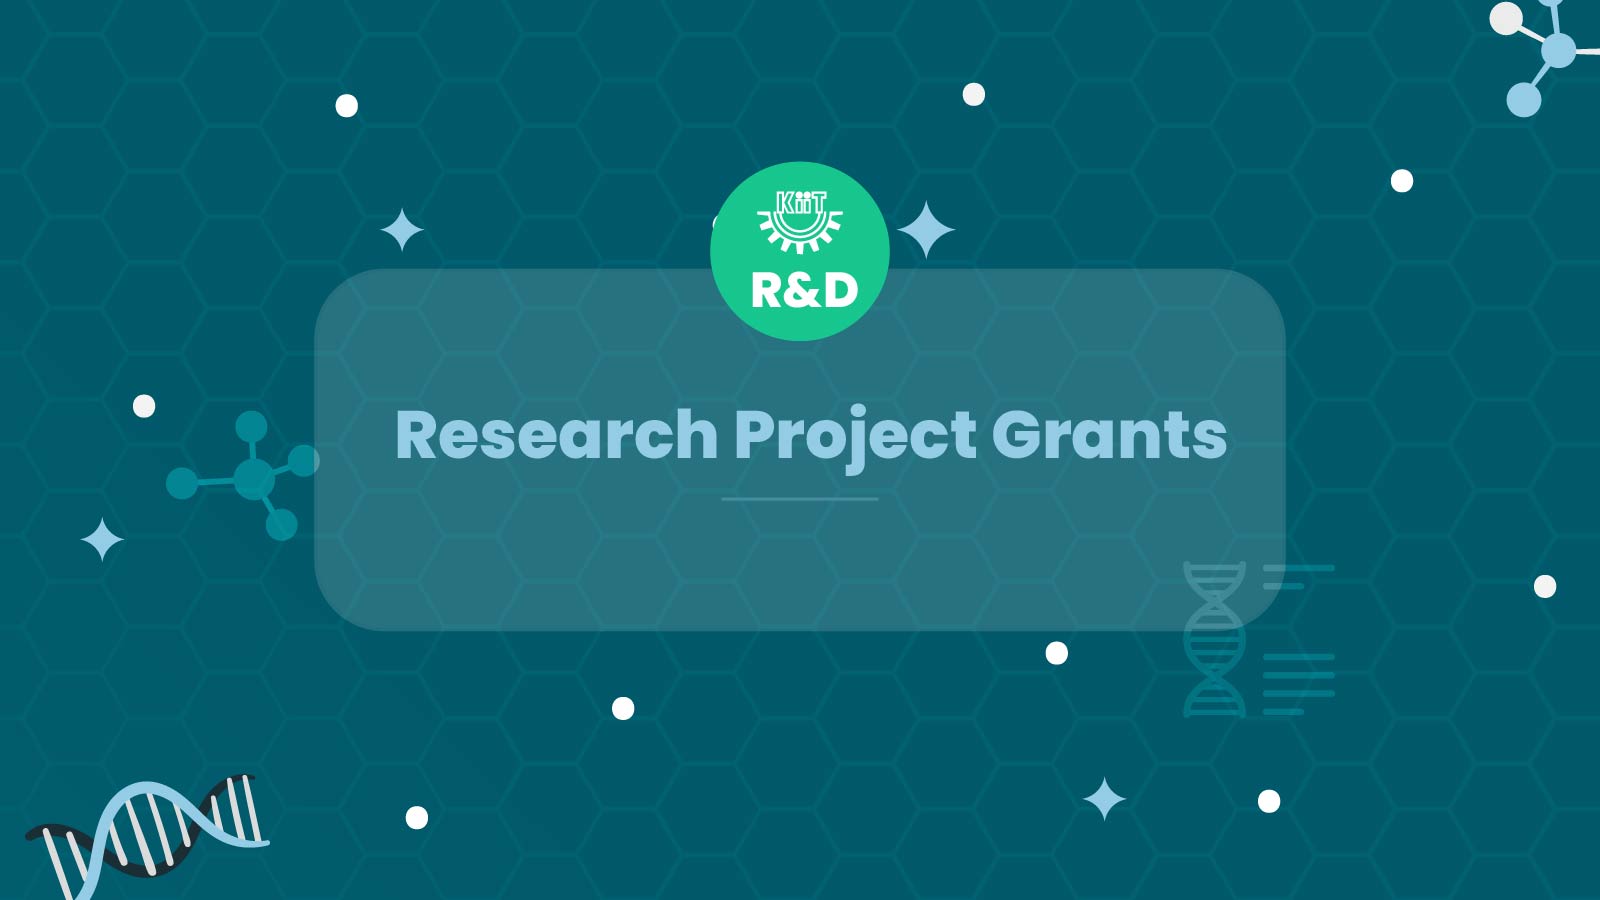 KIIT R&D Research and Development-Research Project Grants